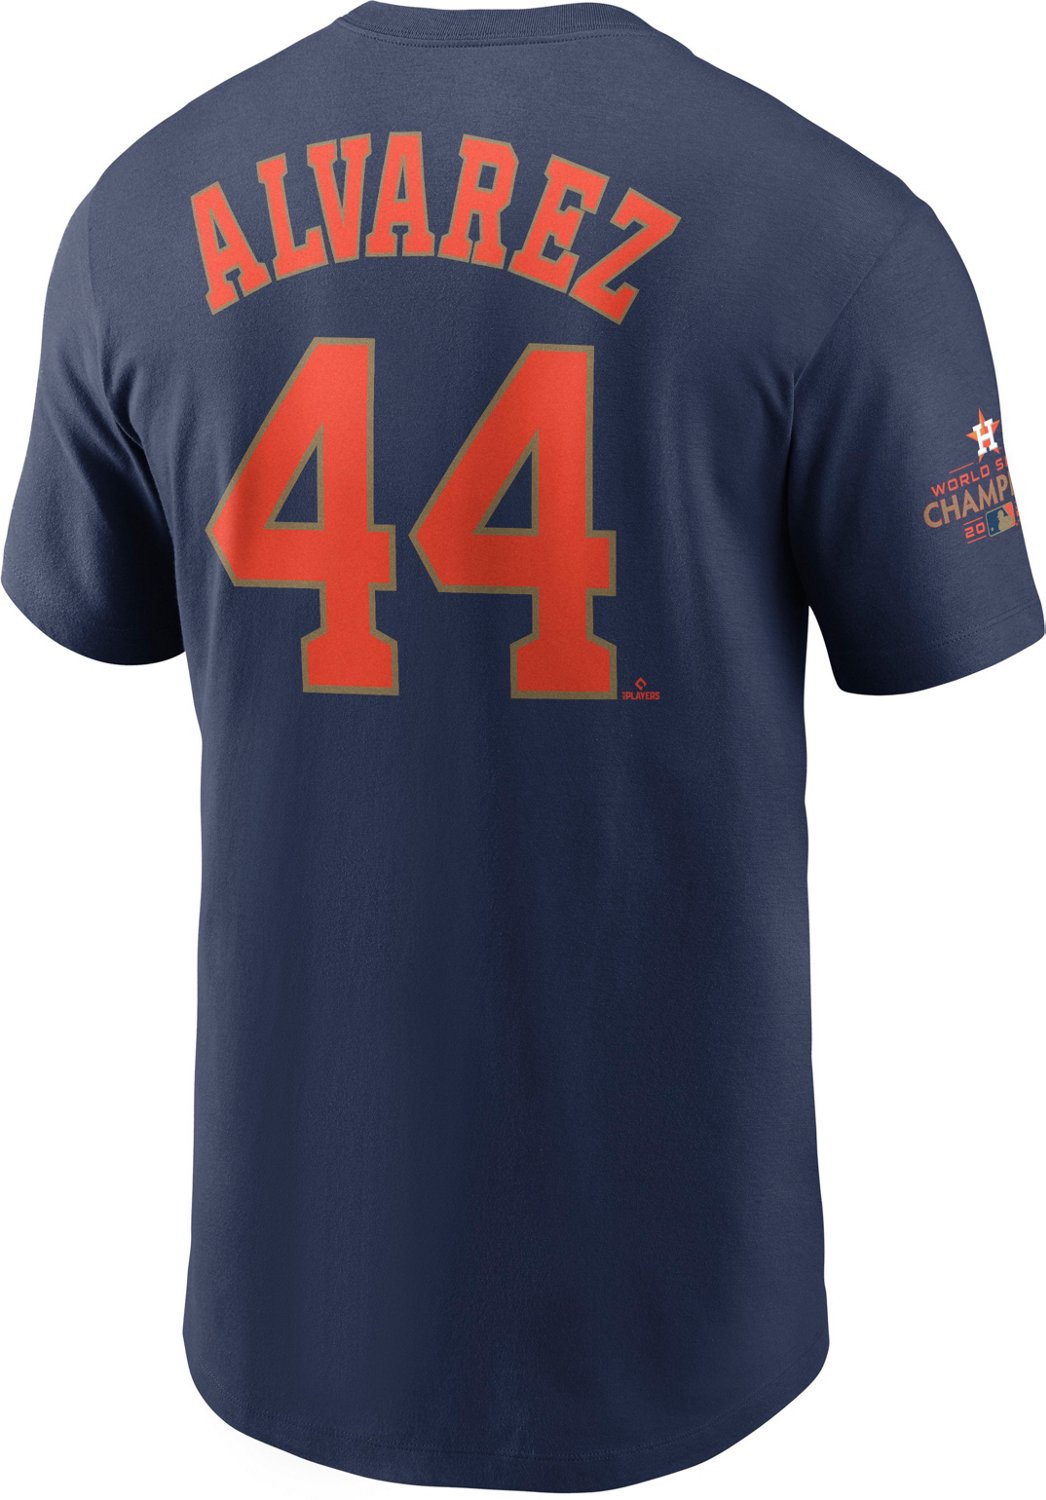 Nike Men’s Houston Astros Alvarez Gold Name and Number Graphic T-Shirt Navy Blue, Small - MLB Apparel Events at Academy Sports